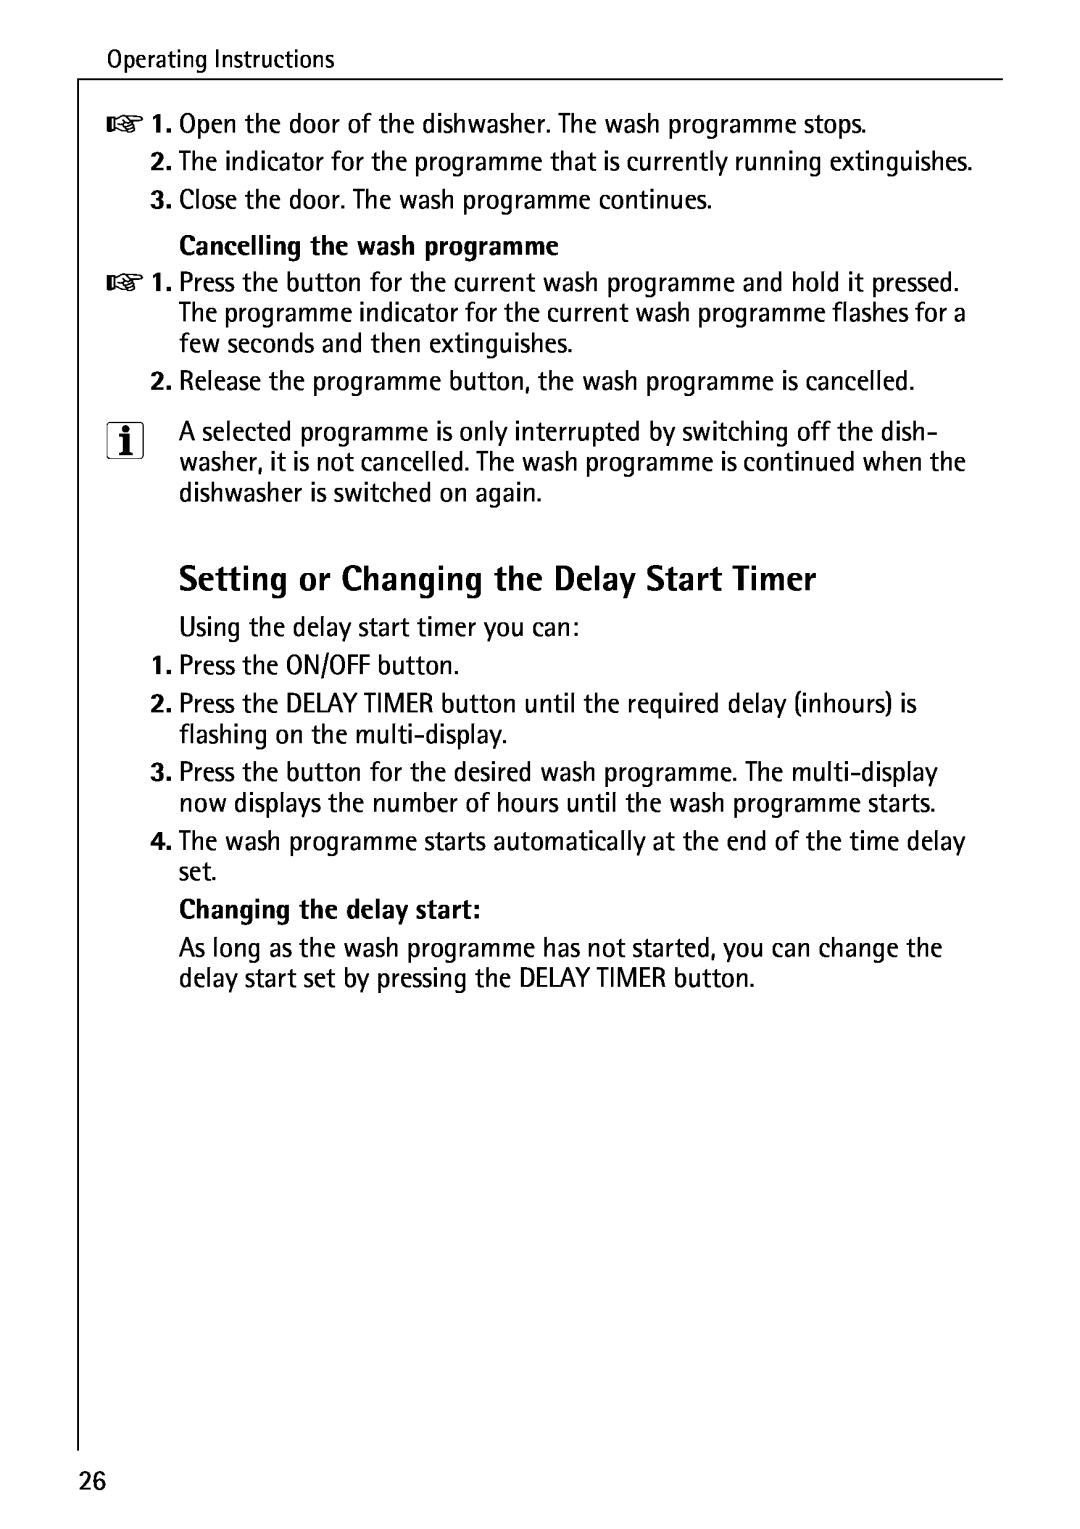 Electrolux 60820 manual Setting or Changing the Delay Start Timer, Cancelling the wash programme, Changing the delay start 